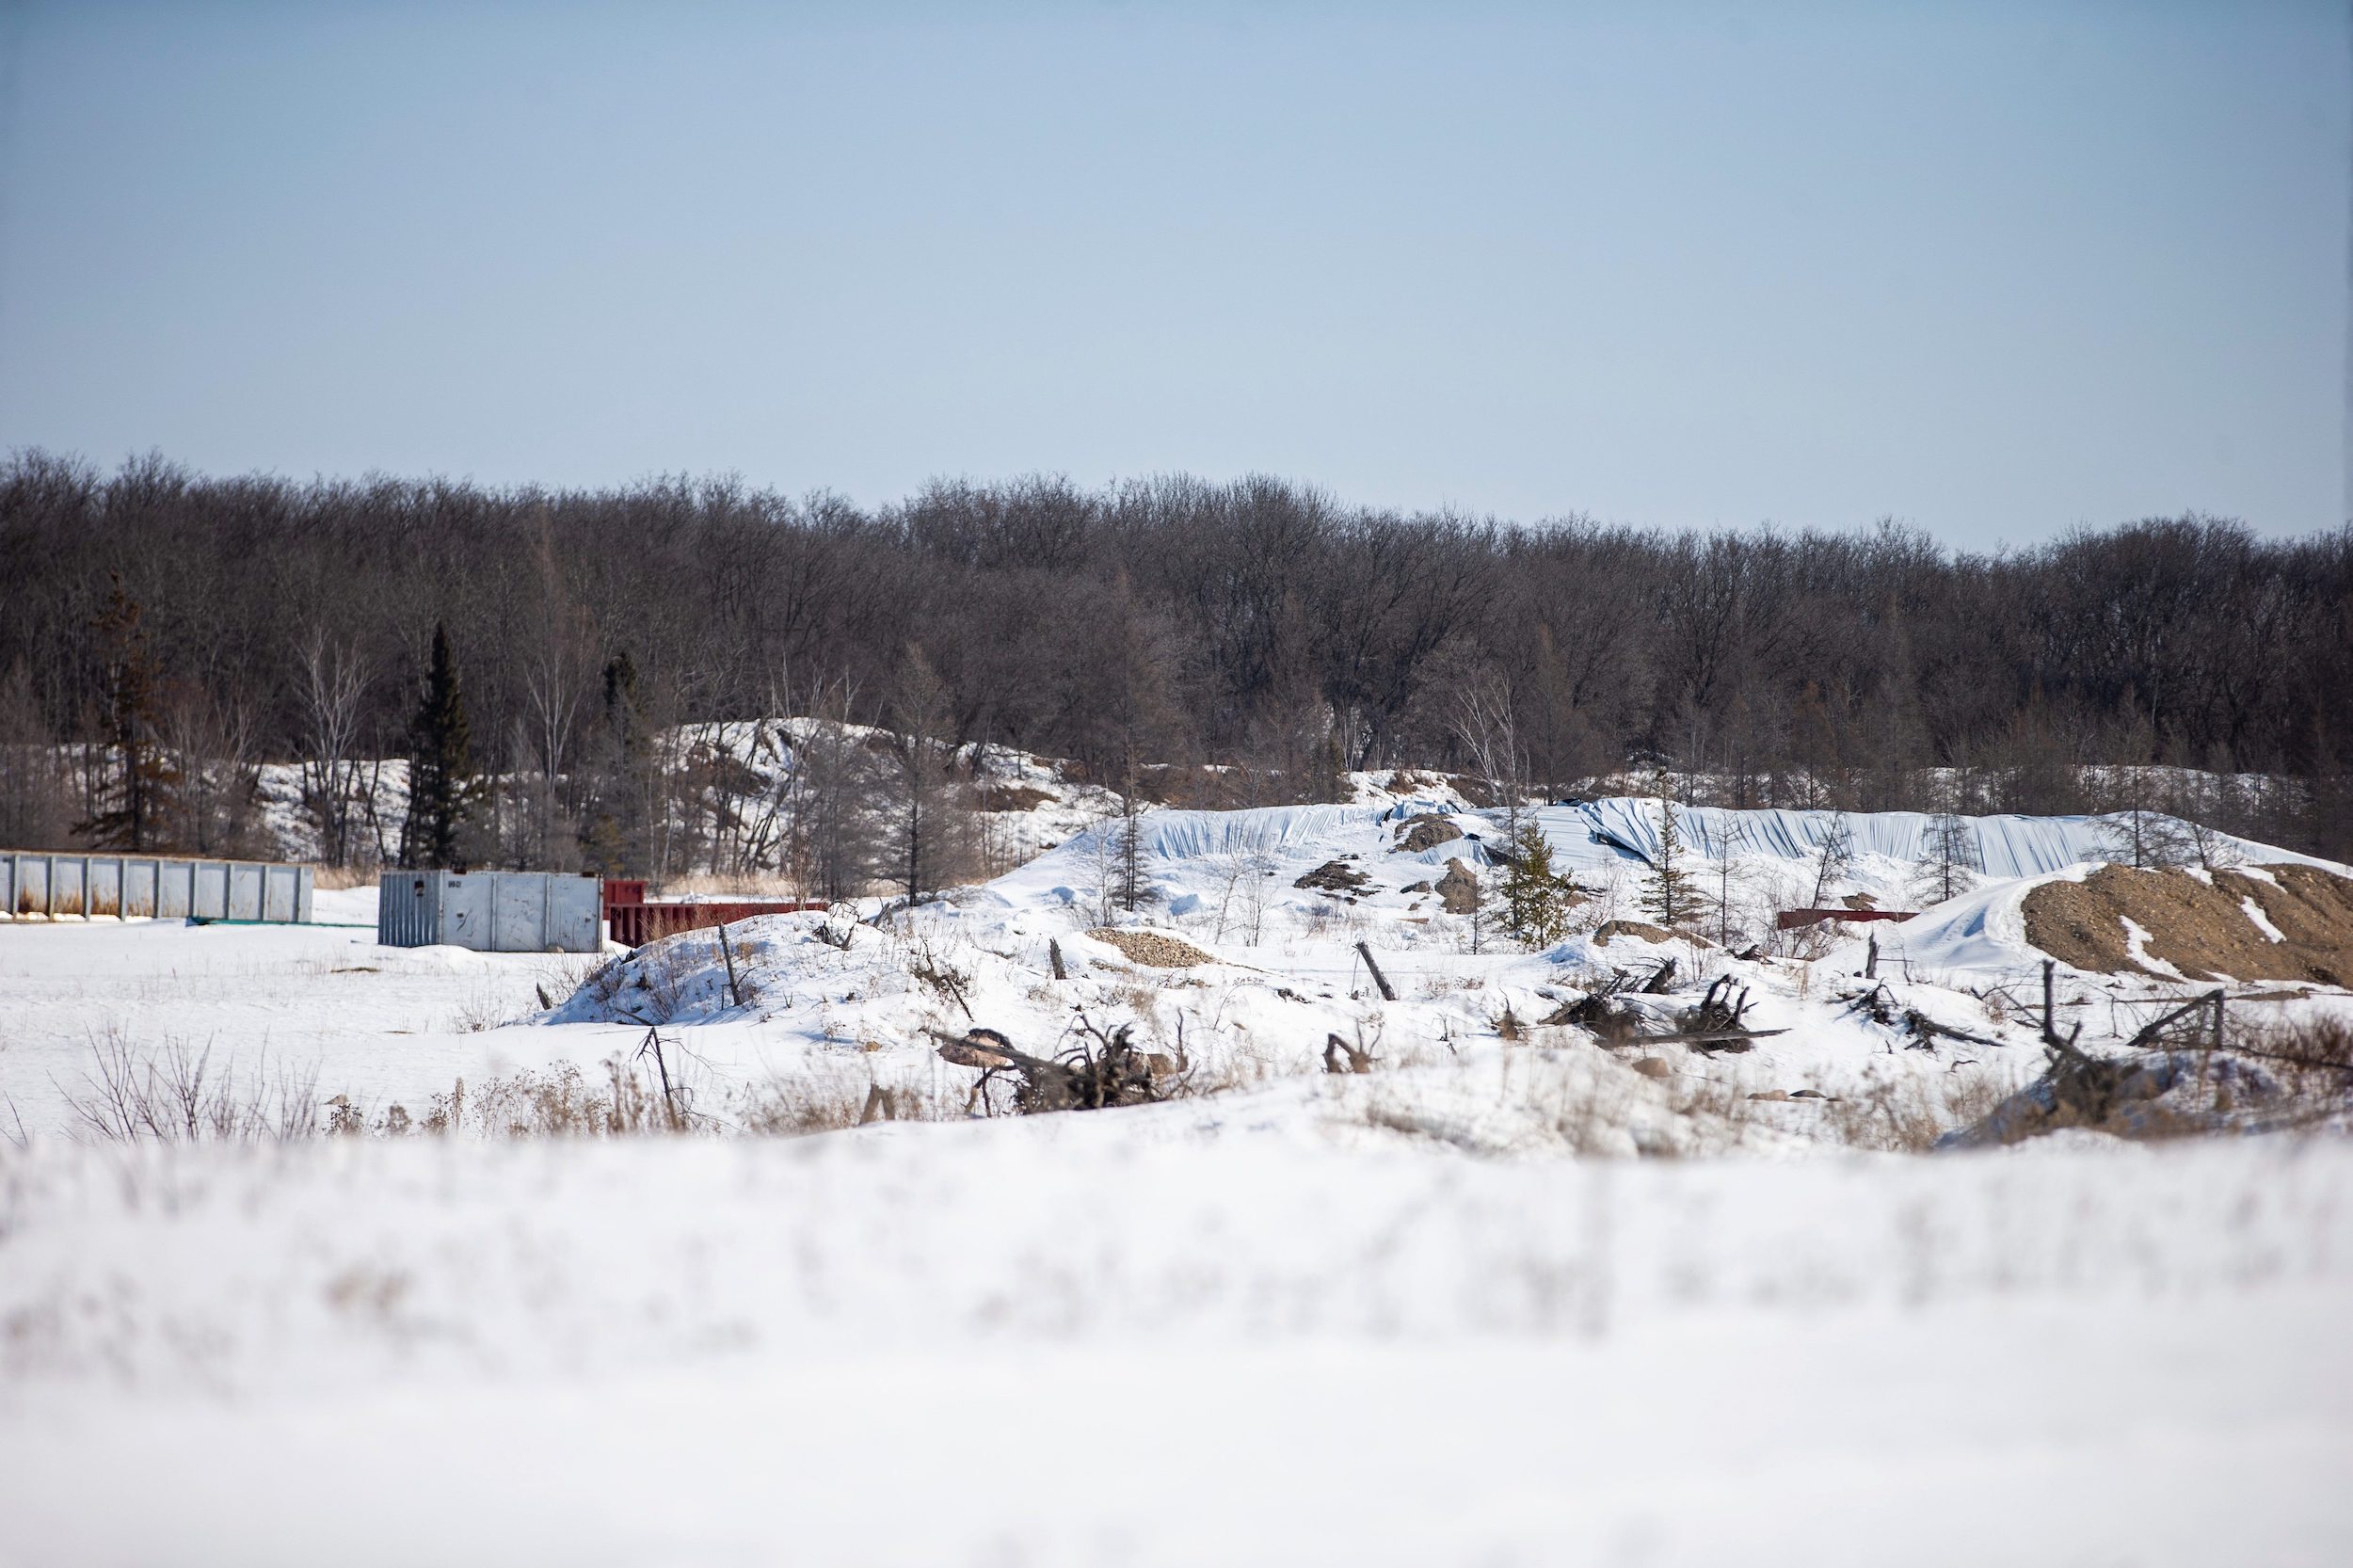 Sand piles covered in white tarps and large metal containers mark the site where Sio Silica has begun exploratory drilling for its proposed silica sand mine near Vivian, Manitoba